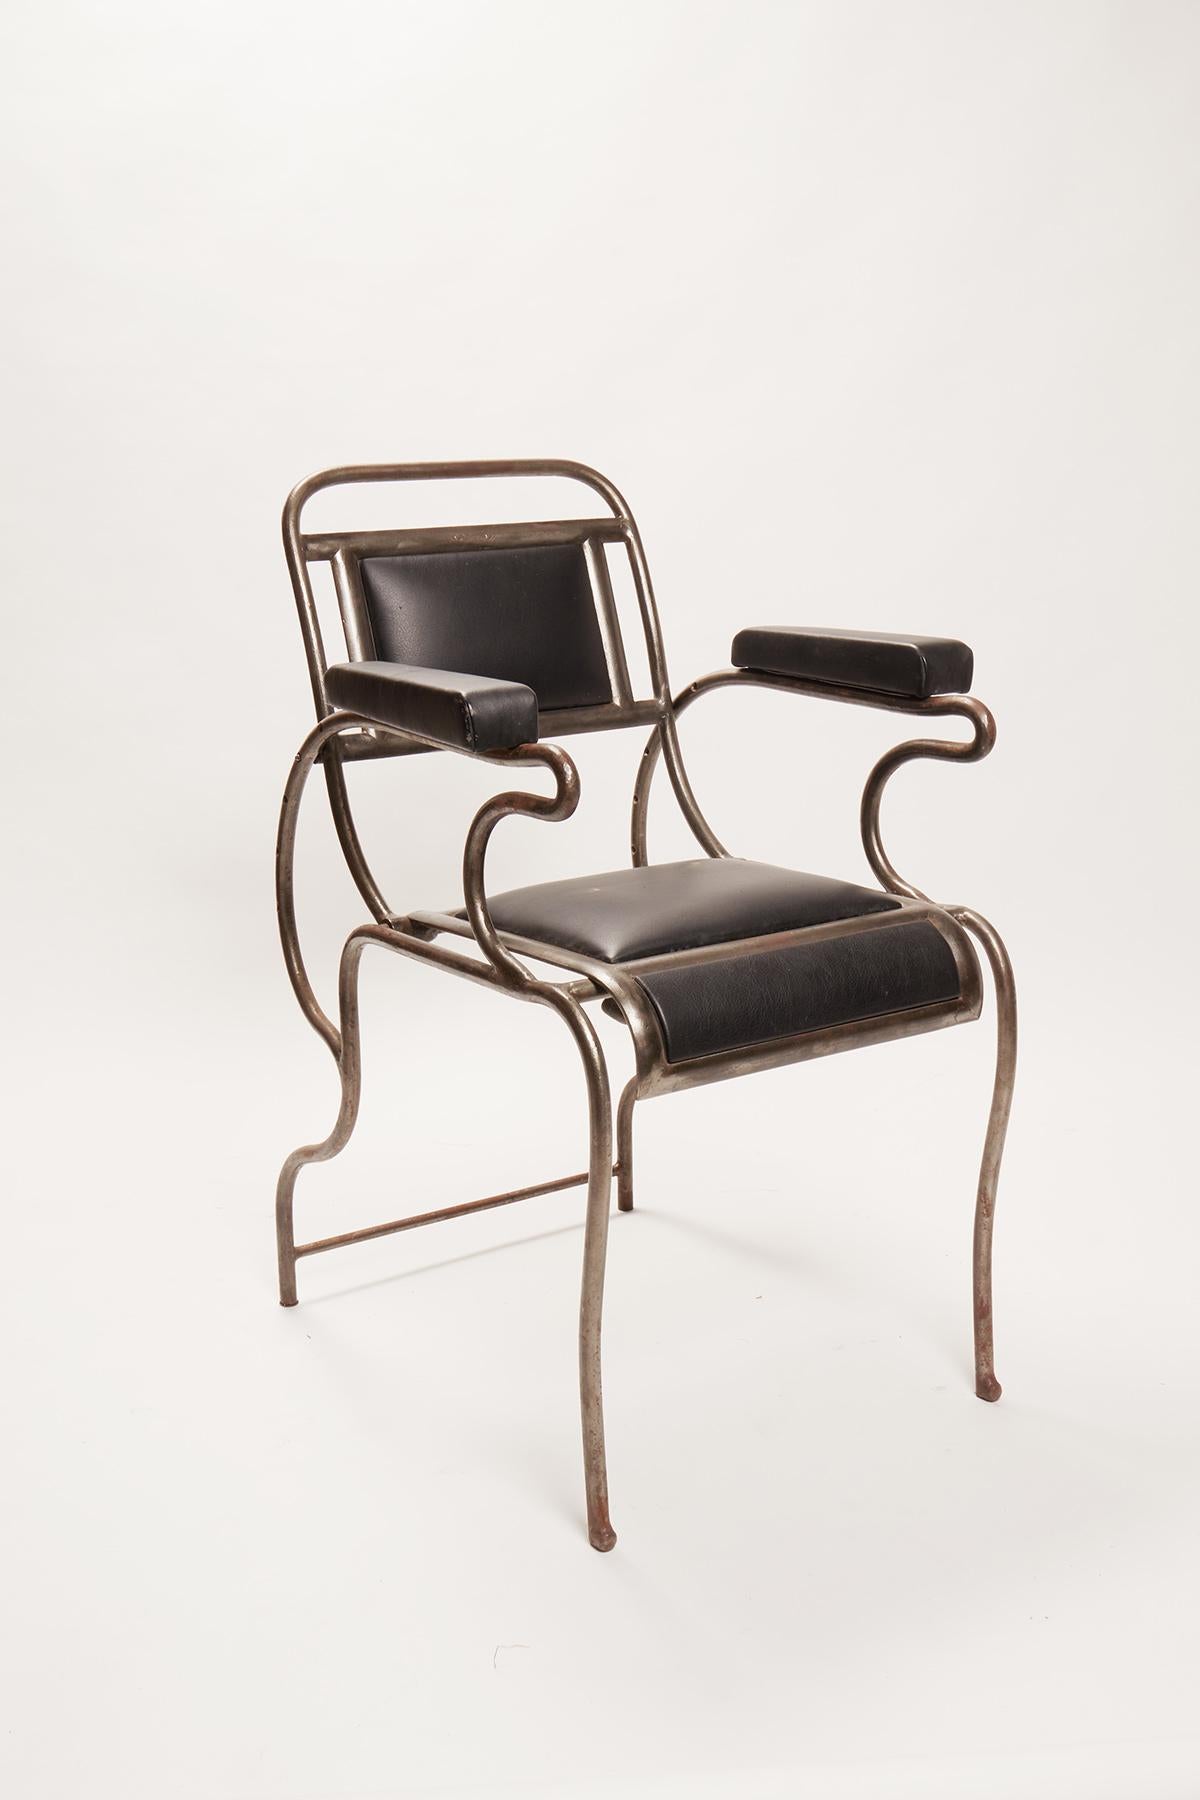 Iron and Stainless Steel Dentist Armchair, USA, 1930 For Sale 4